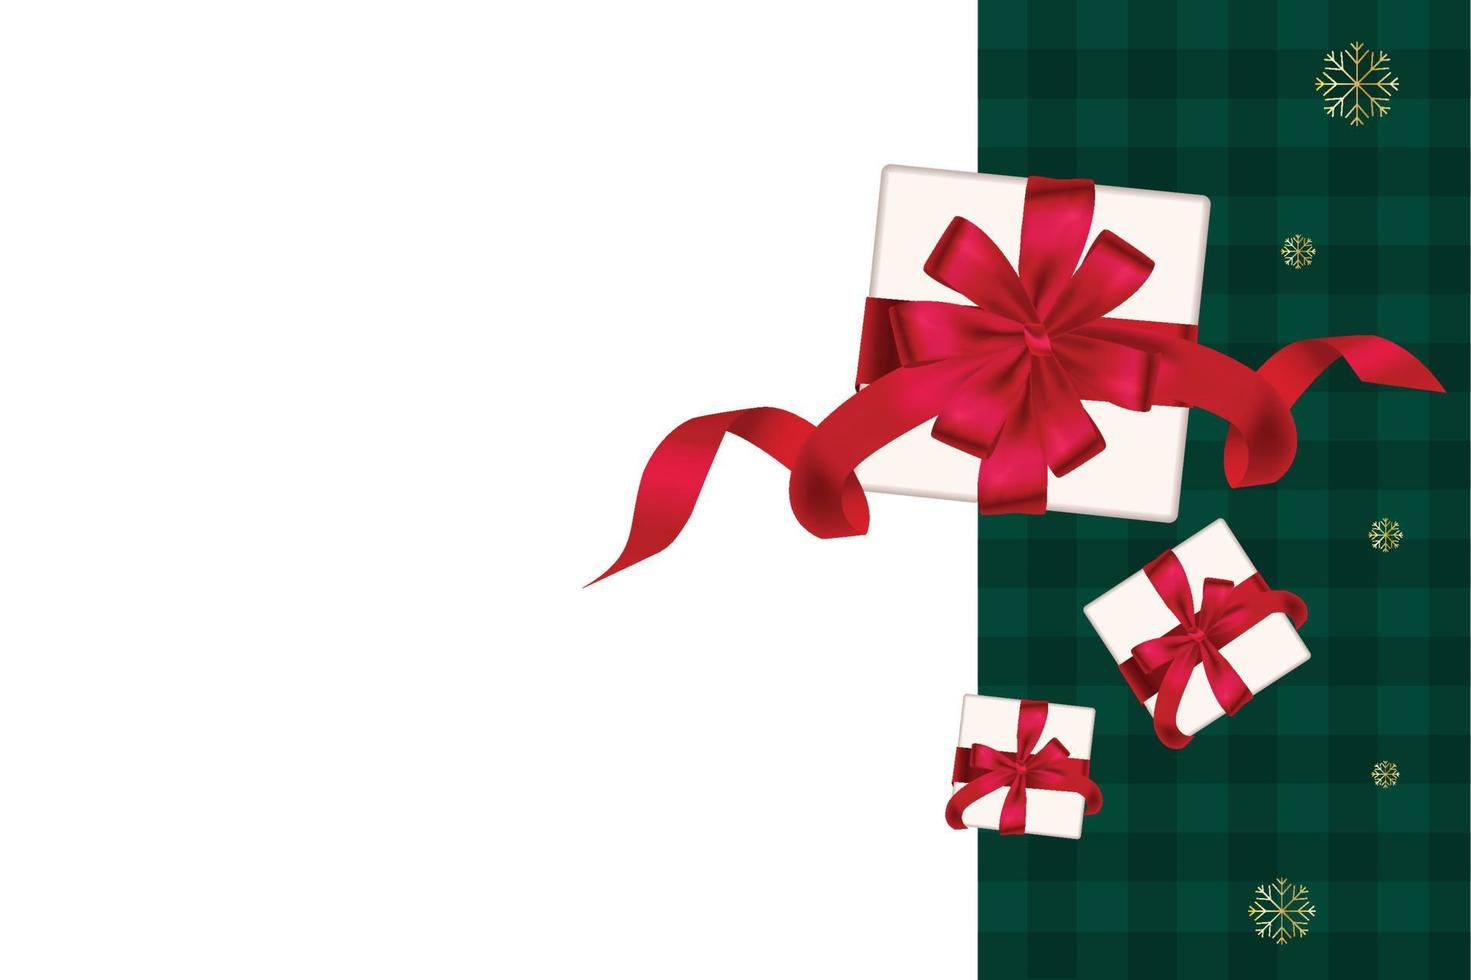 Decorative gift box with red bow. Plaid green background, New year Christmas,Vector illustration vector